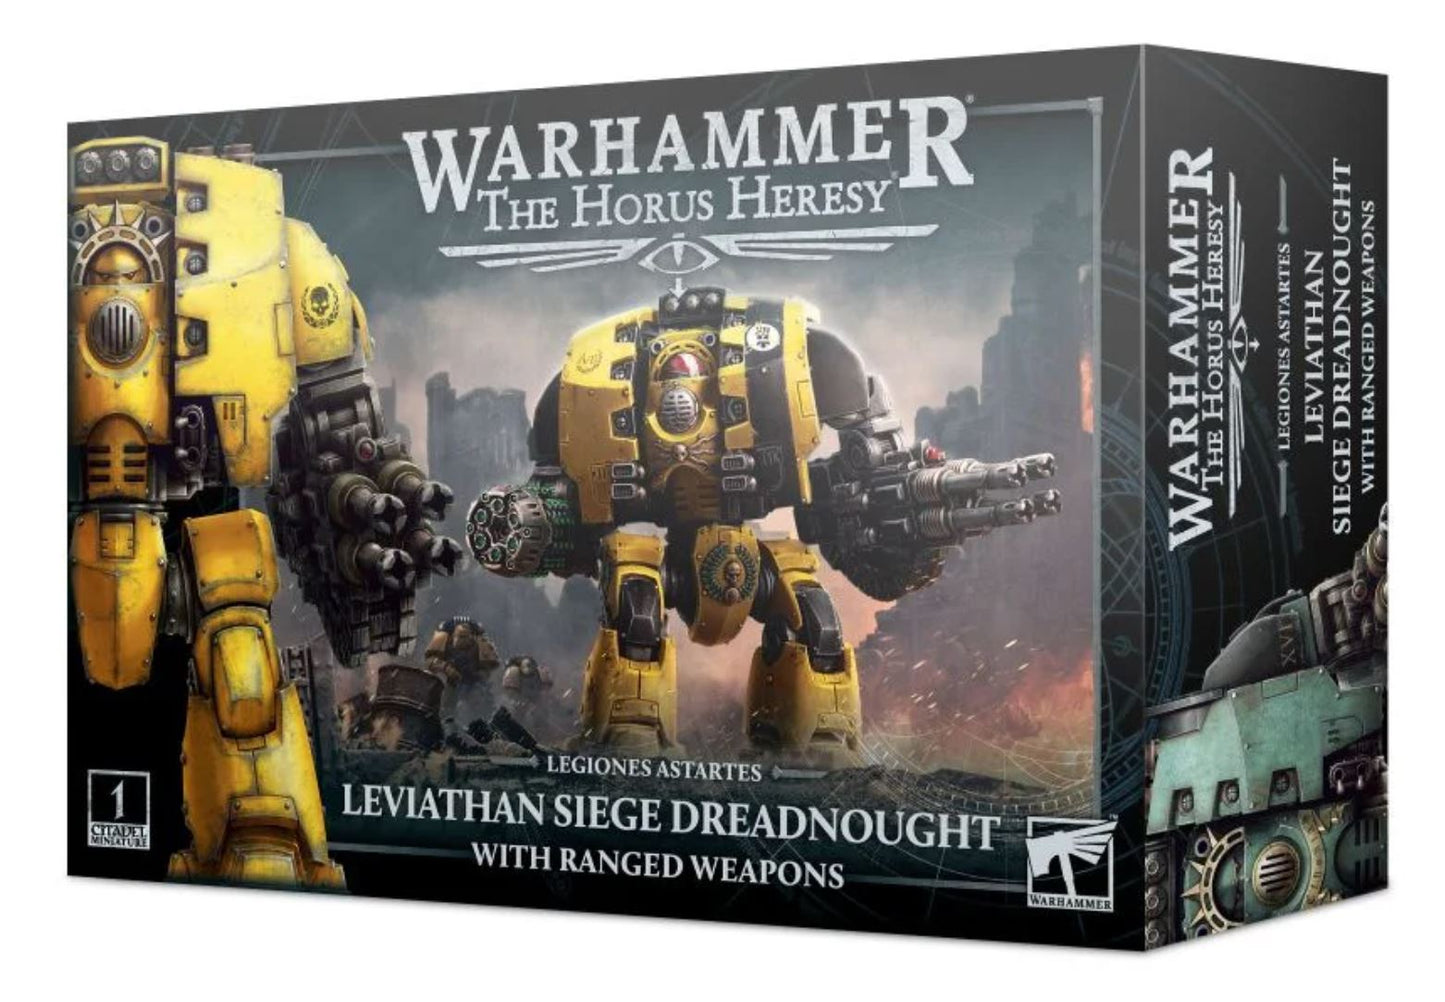 Horus Heresy - Leviathan Siege Dreadnought with Ranged Weapons